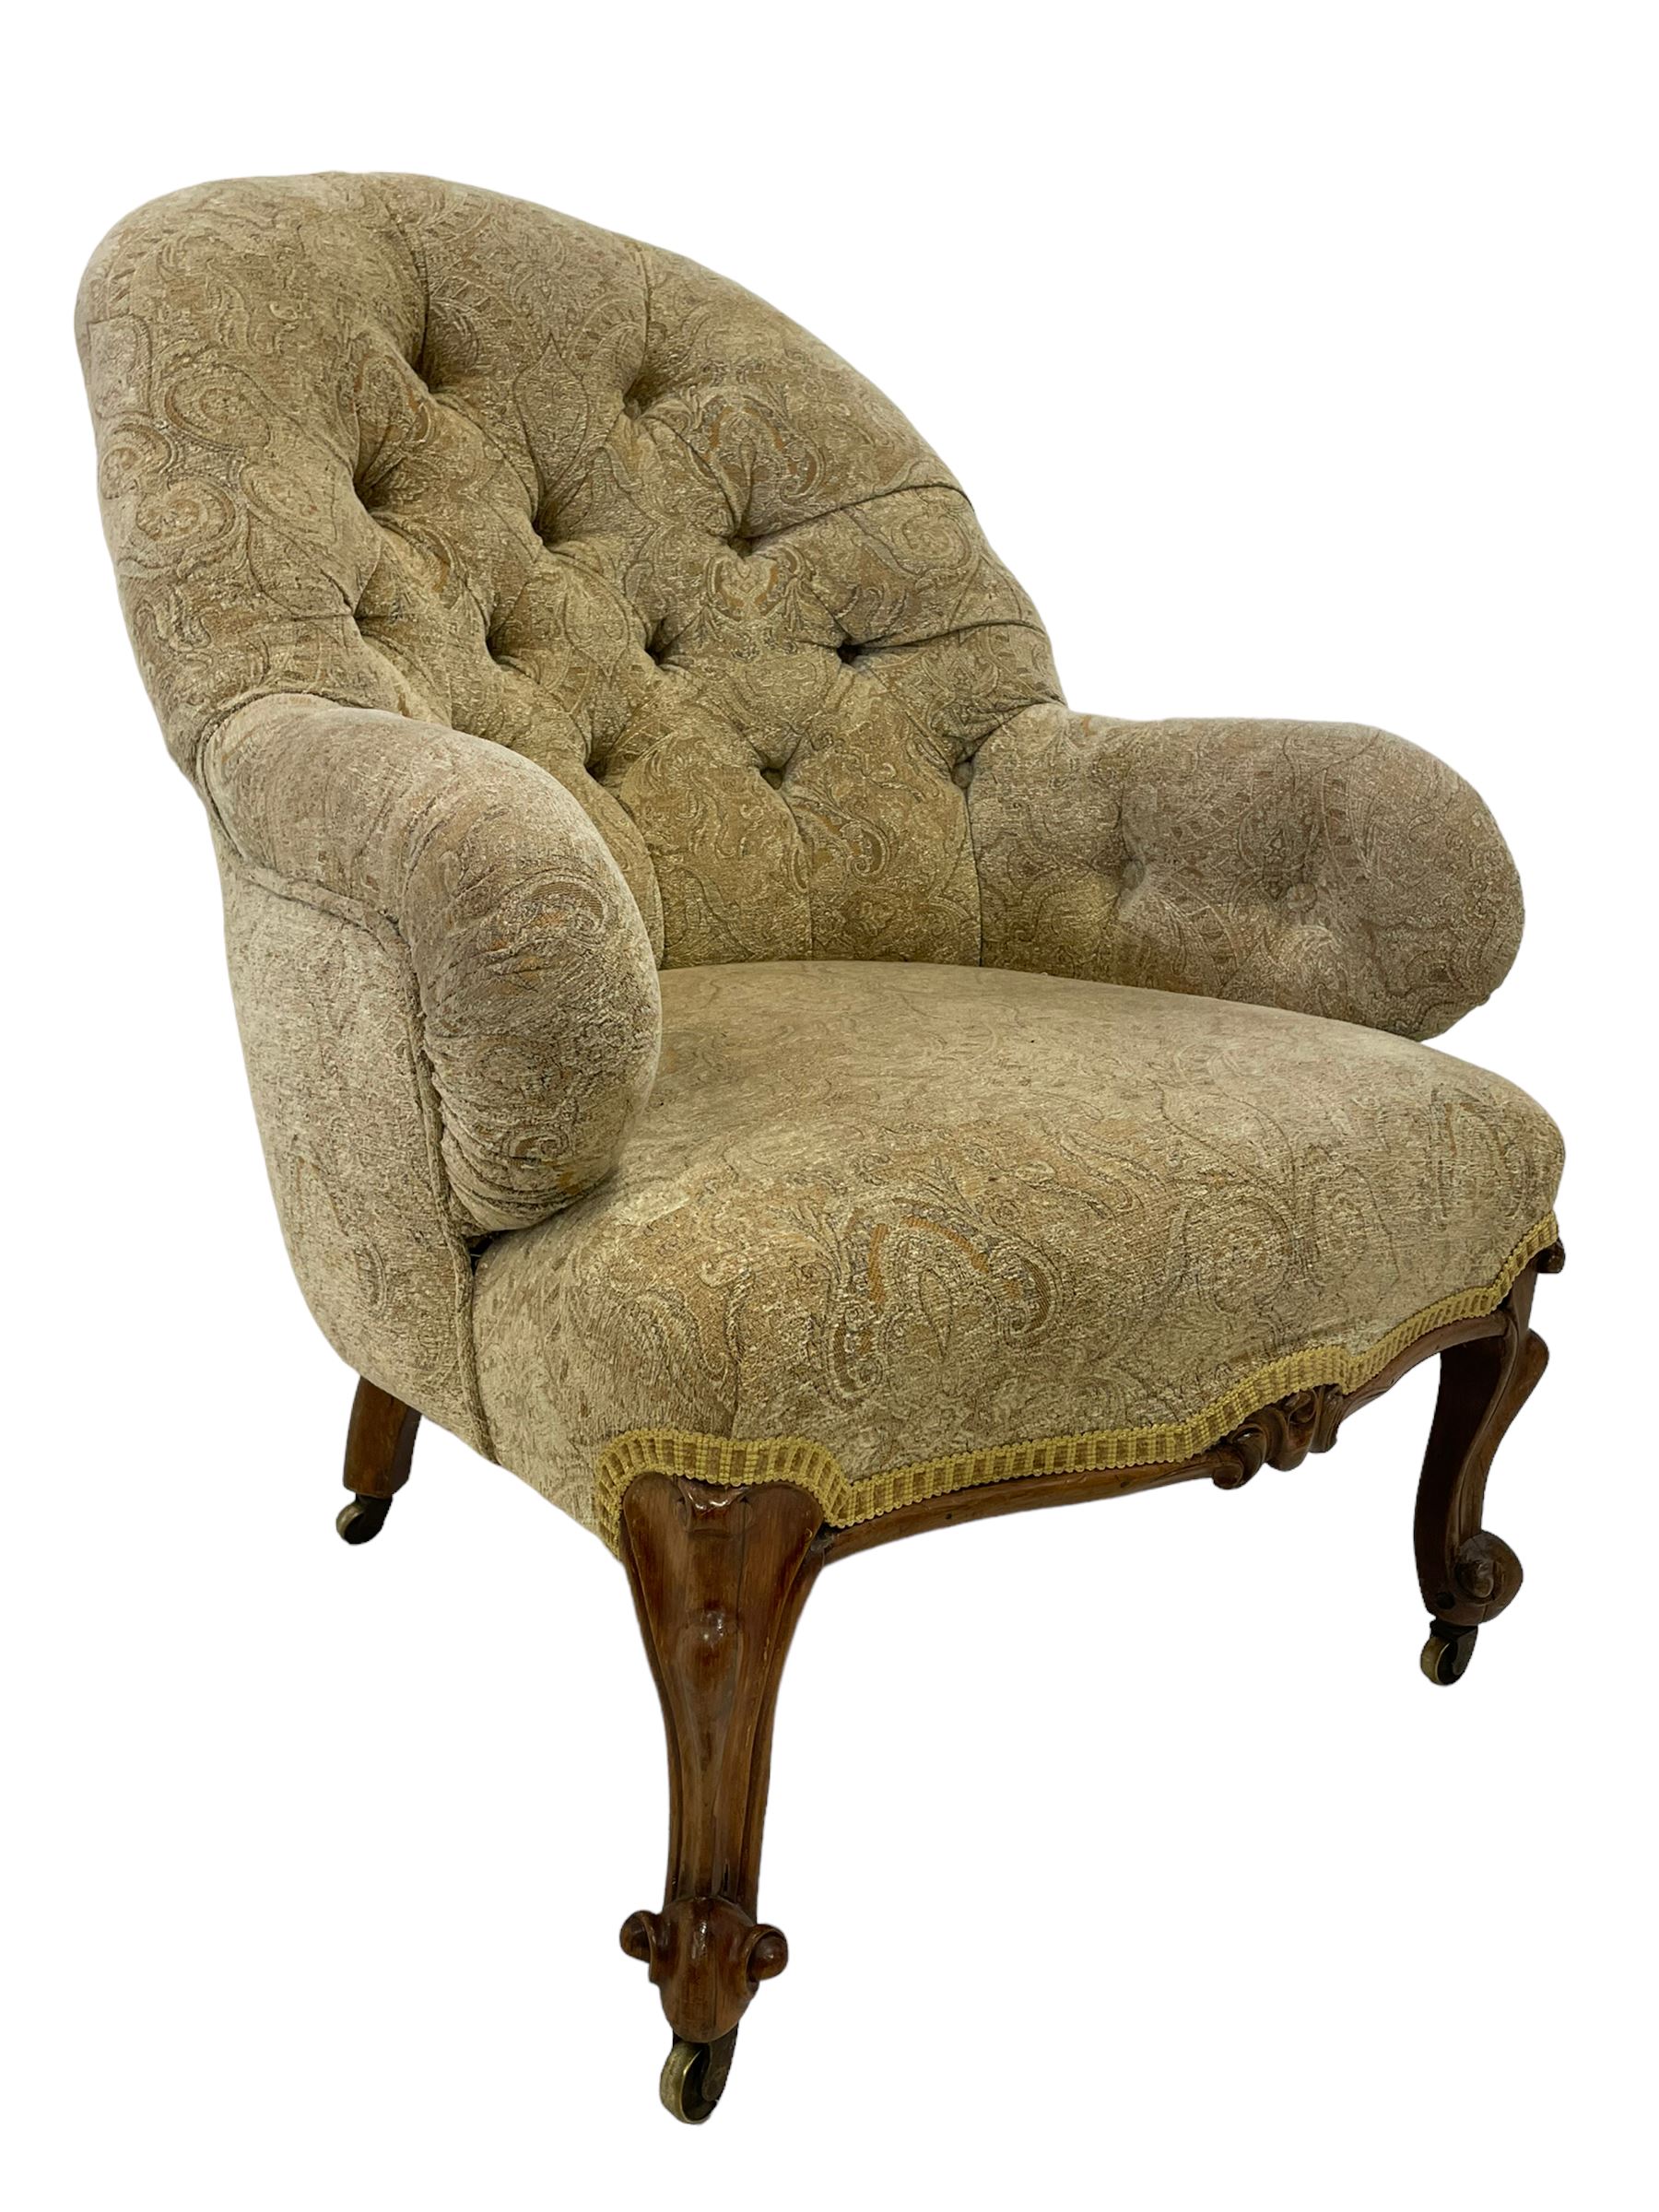 19th century rosewood framed armchair - Image 3 of 6